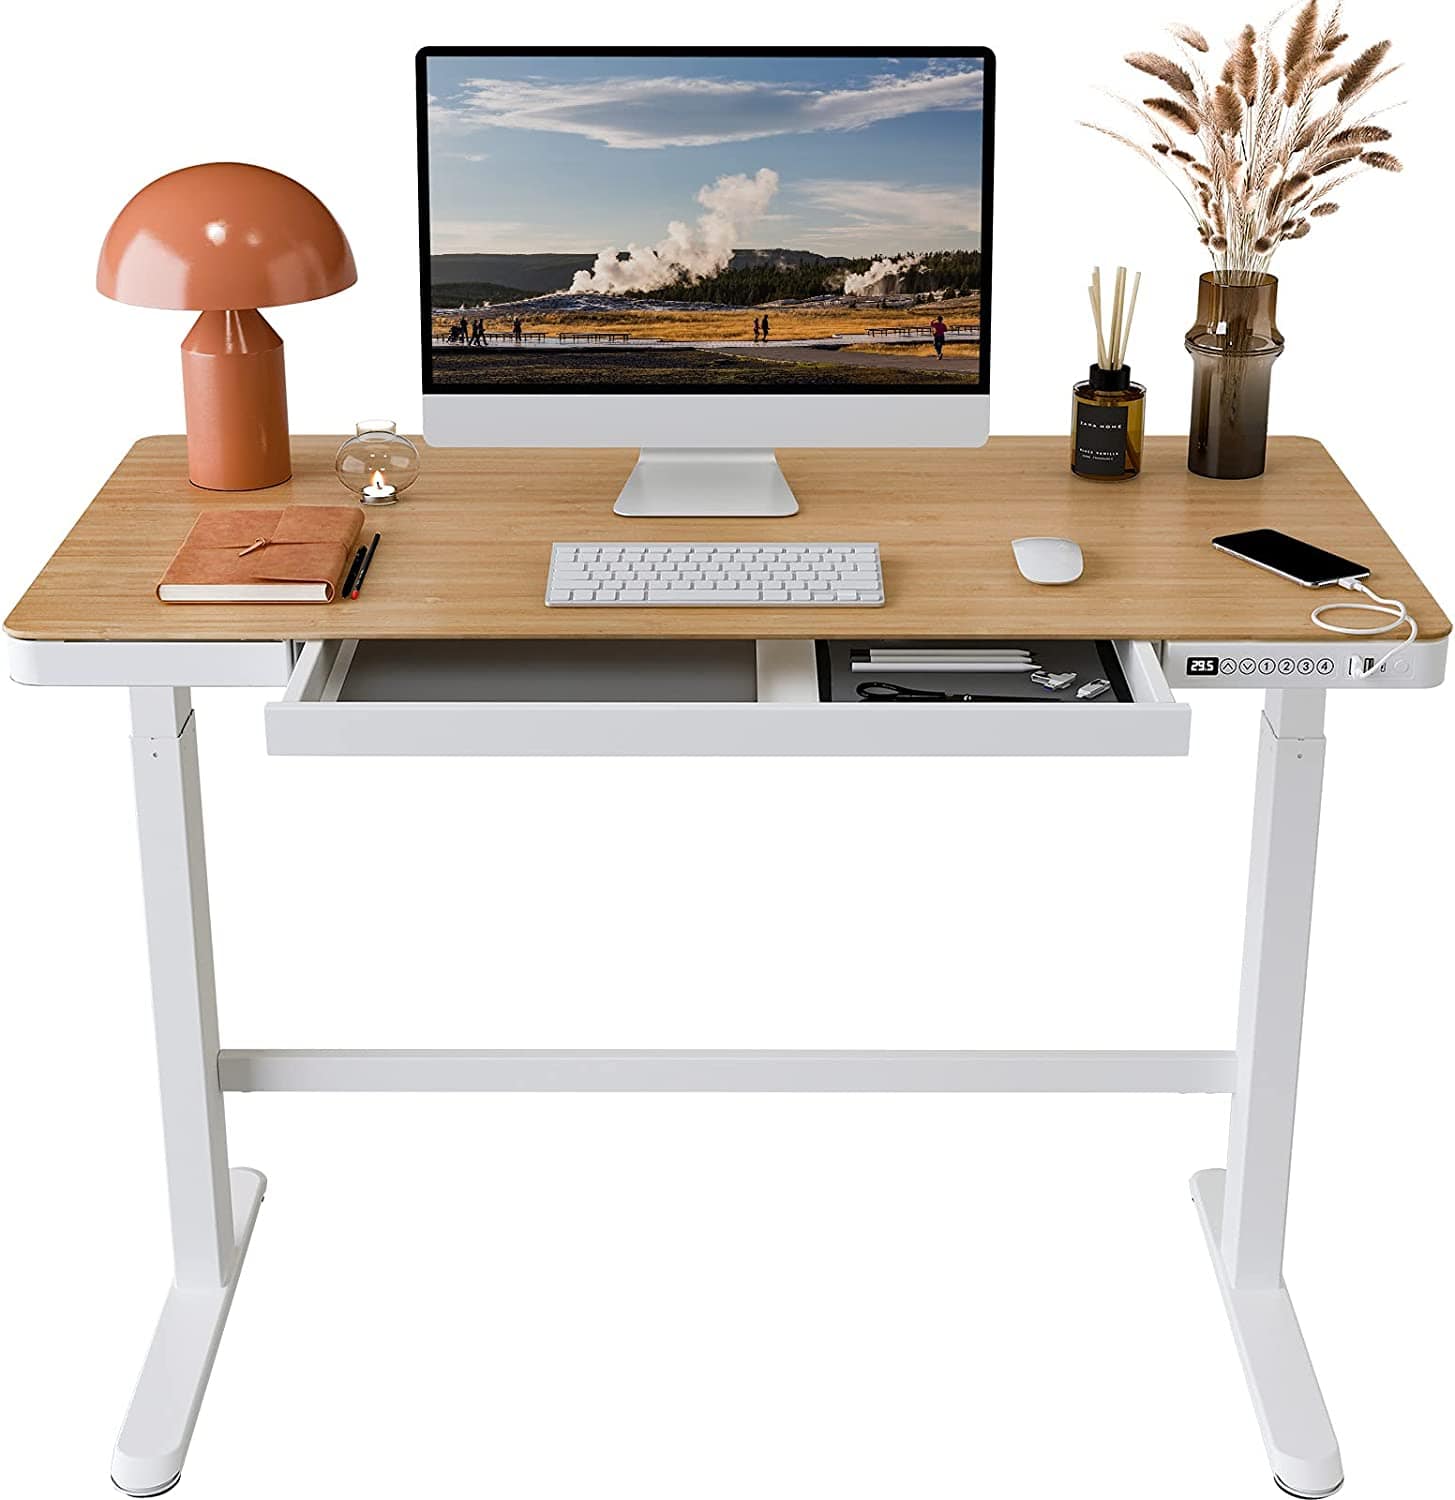 Branded Bamboo/White / Wood Standing Desk Drawers Electric Sit Stand up Desk Storage 48 X 24 Inches Bamboo Texture Desktop Height Adjustable White Frame New